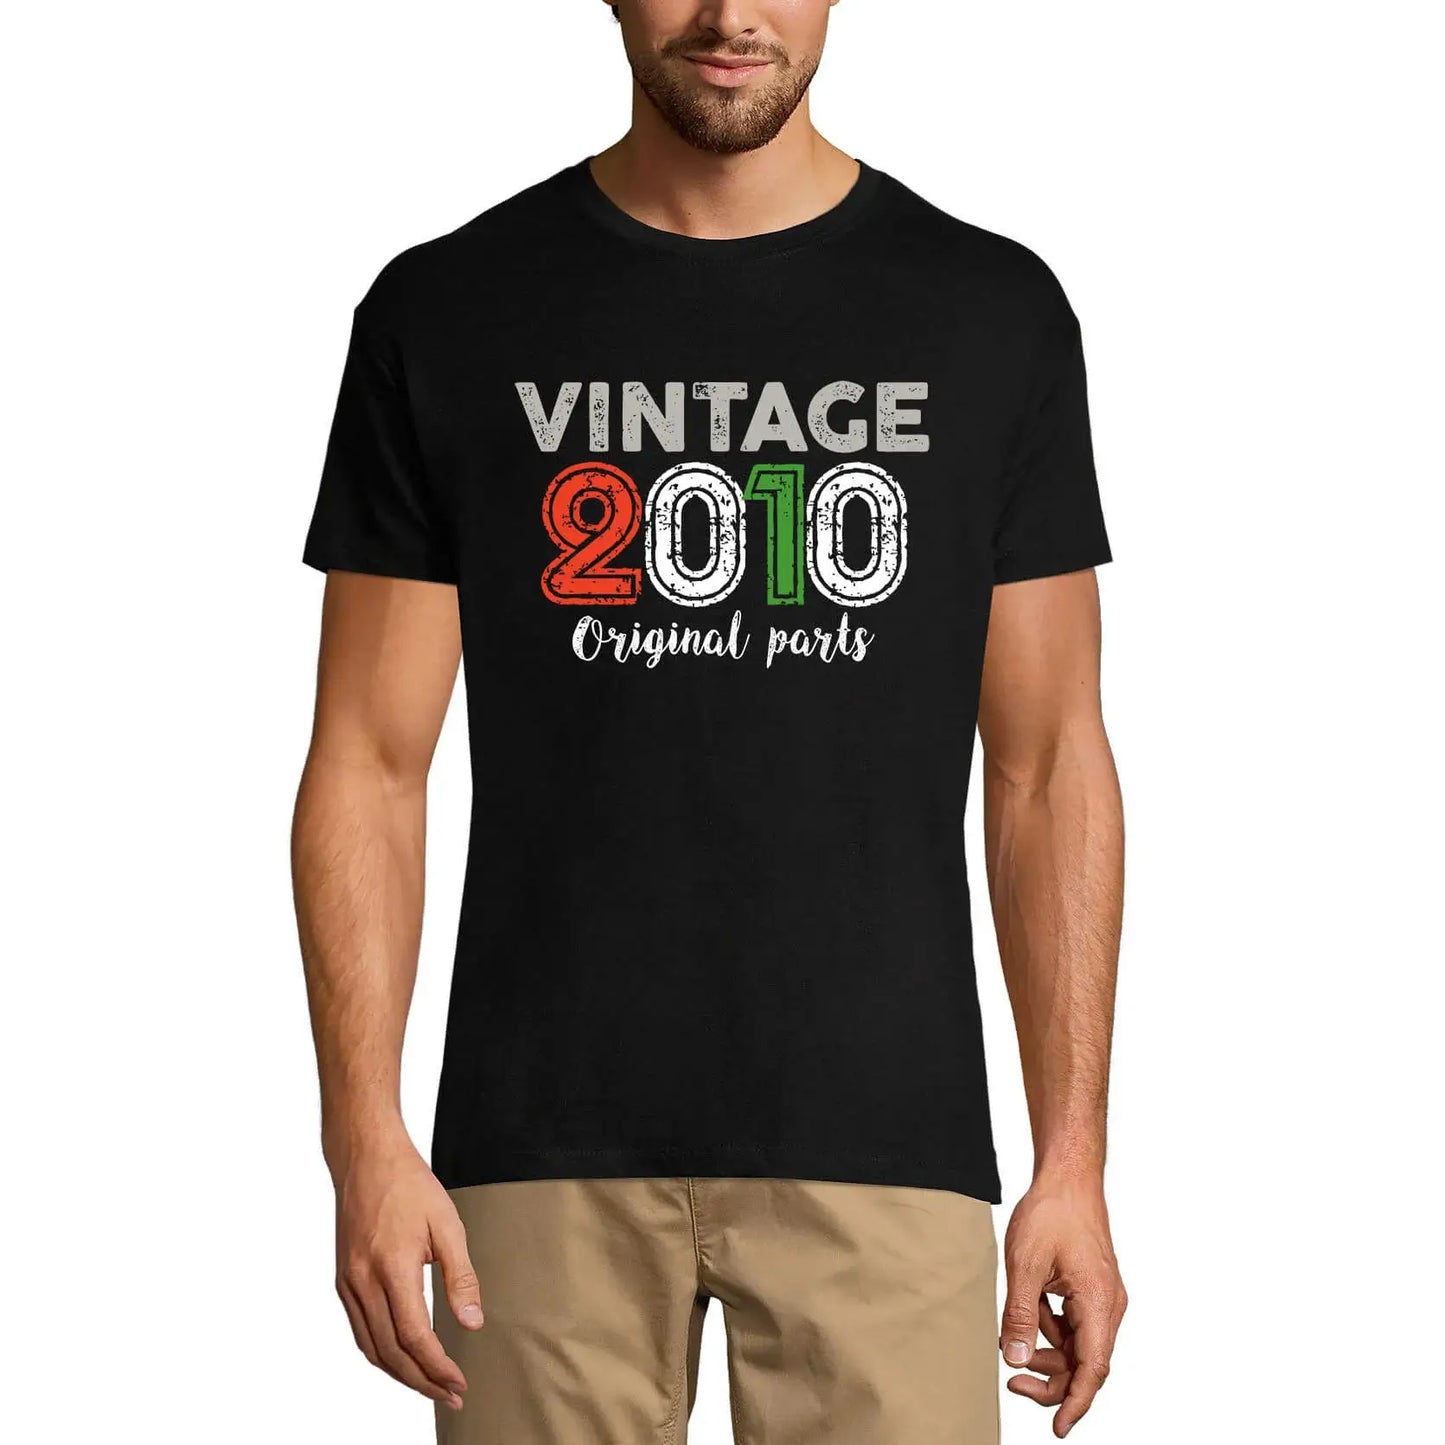 Men's Graphic T-Shirt Original Parts 2010 14th Birthday Anniversary 14 Year Old Gift 2010 Vintage Eco-Friendly Short Sleeve Novelty Tee